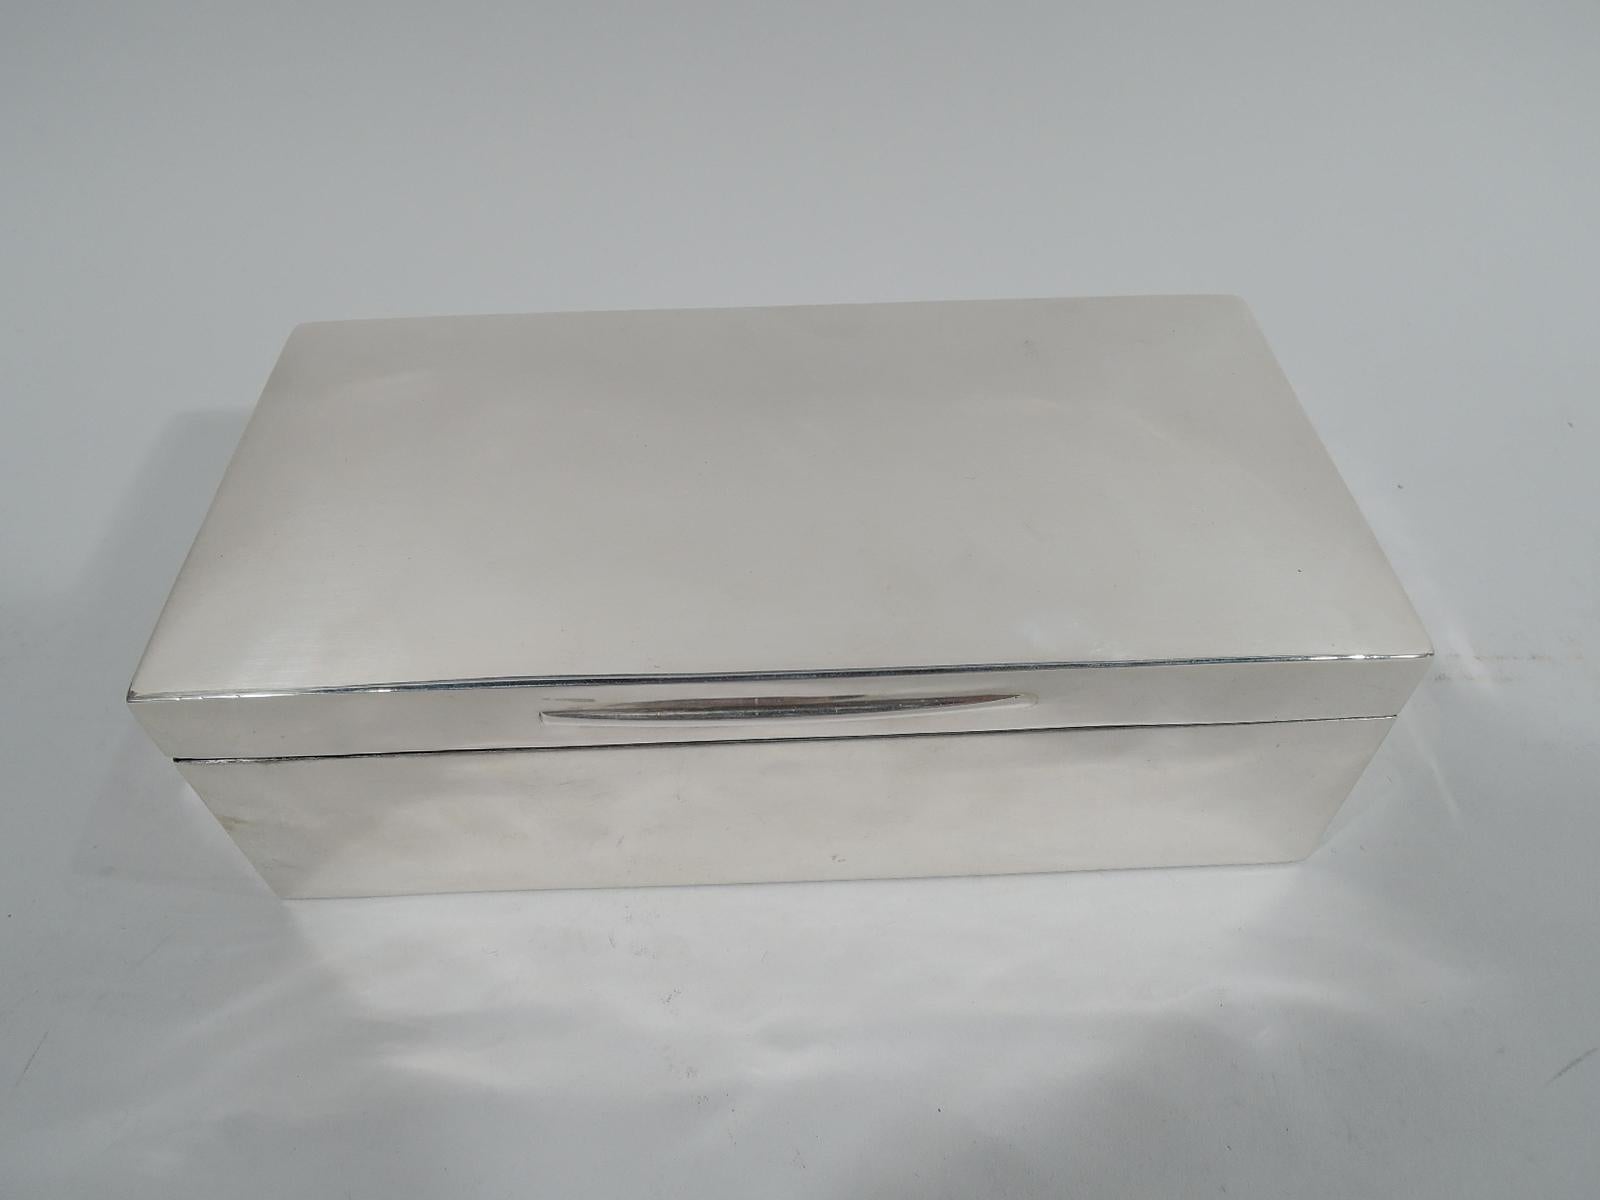 Victorian modern sterling silver box, 1897. Rectangular with straight sides and angular corners. Cover hinged and gently curved with tapering tab. Box and cover interior cedar lined and partitioned. Box underside leather lined. Fully marked